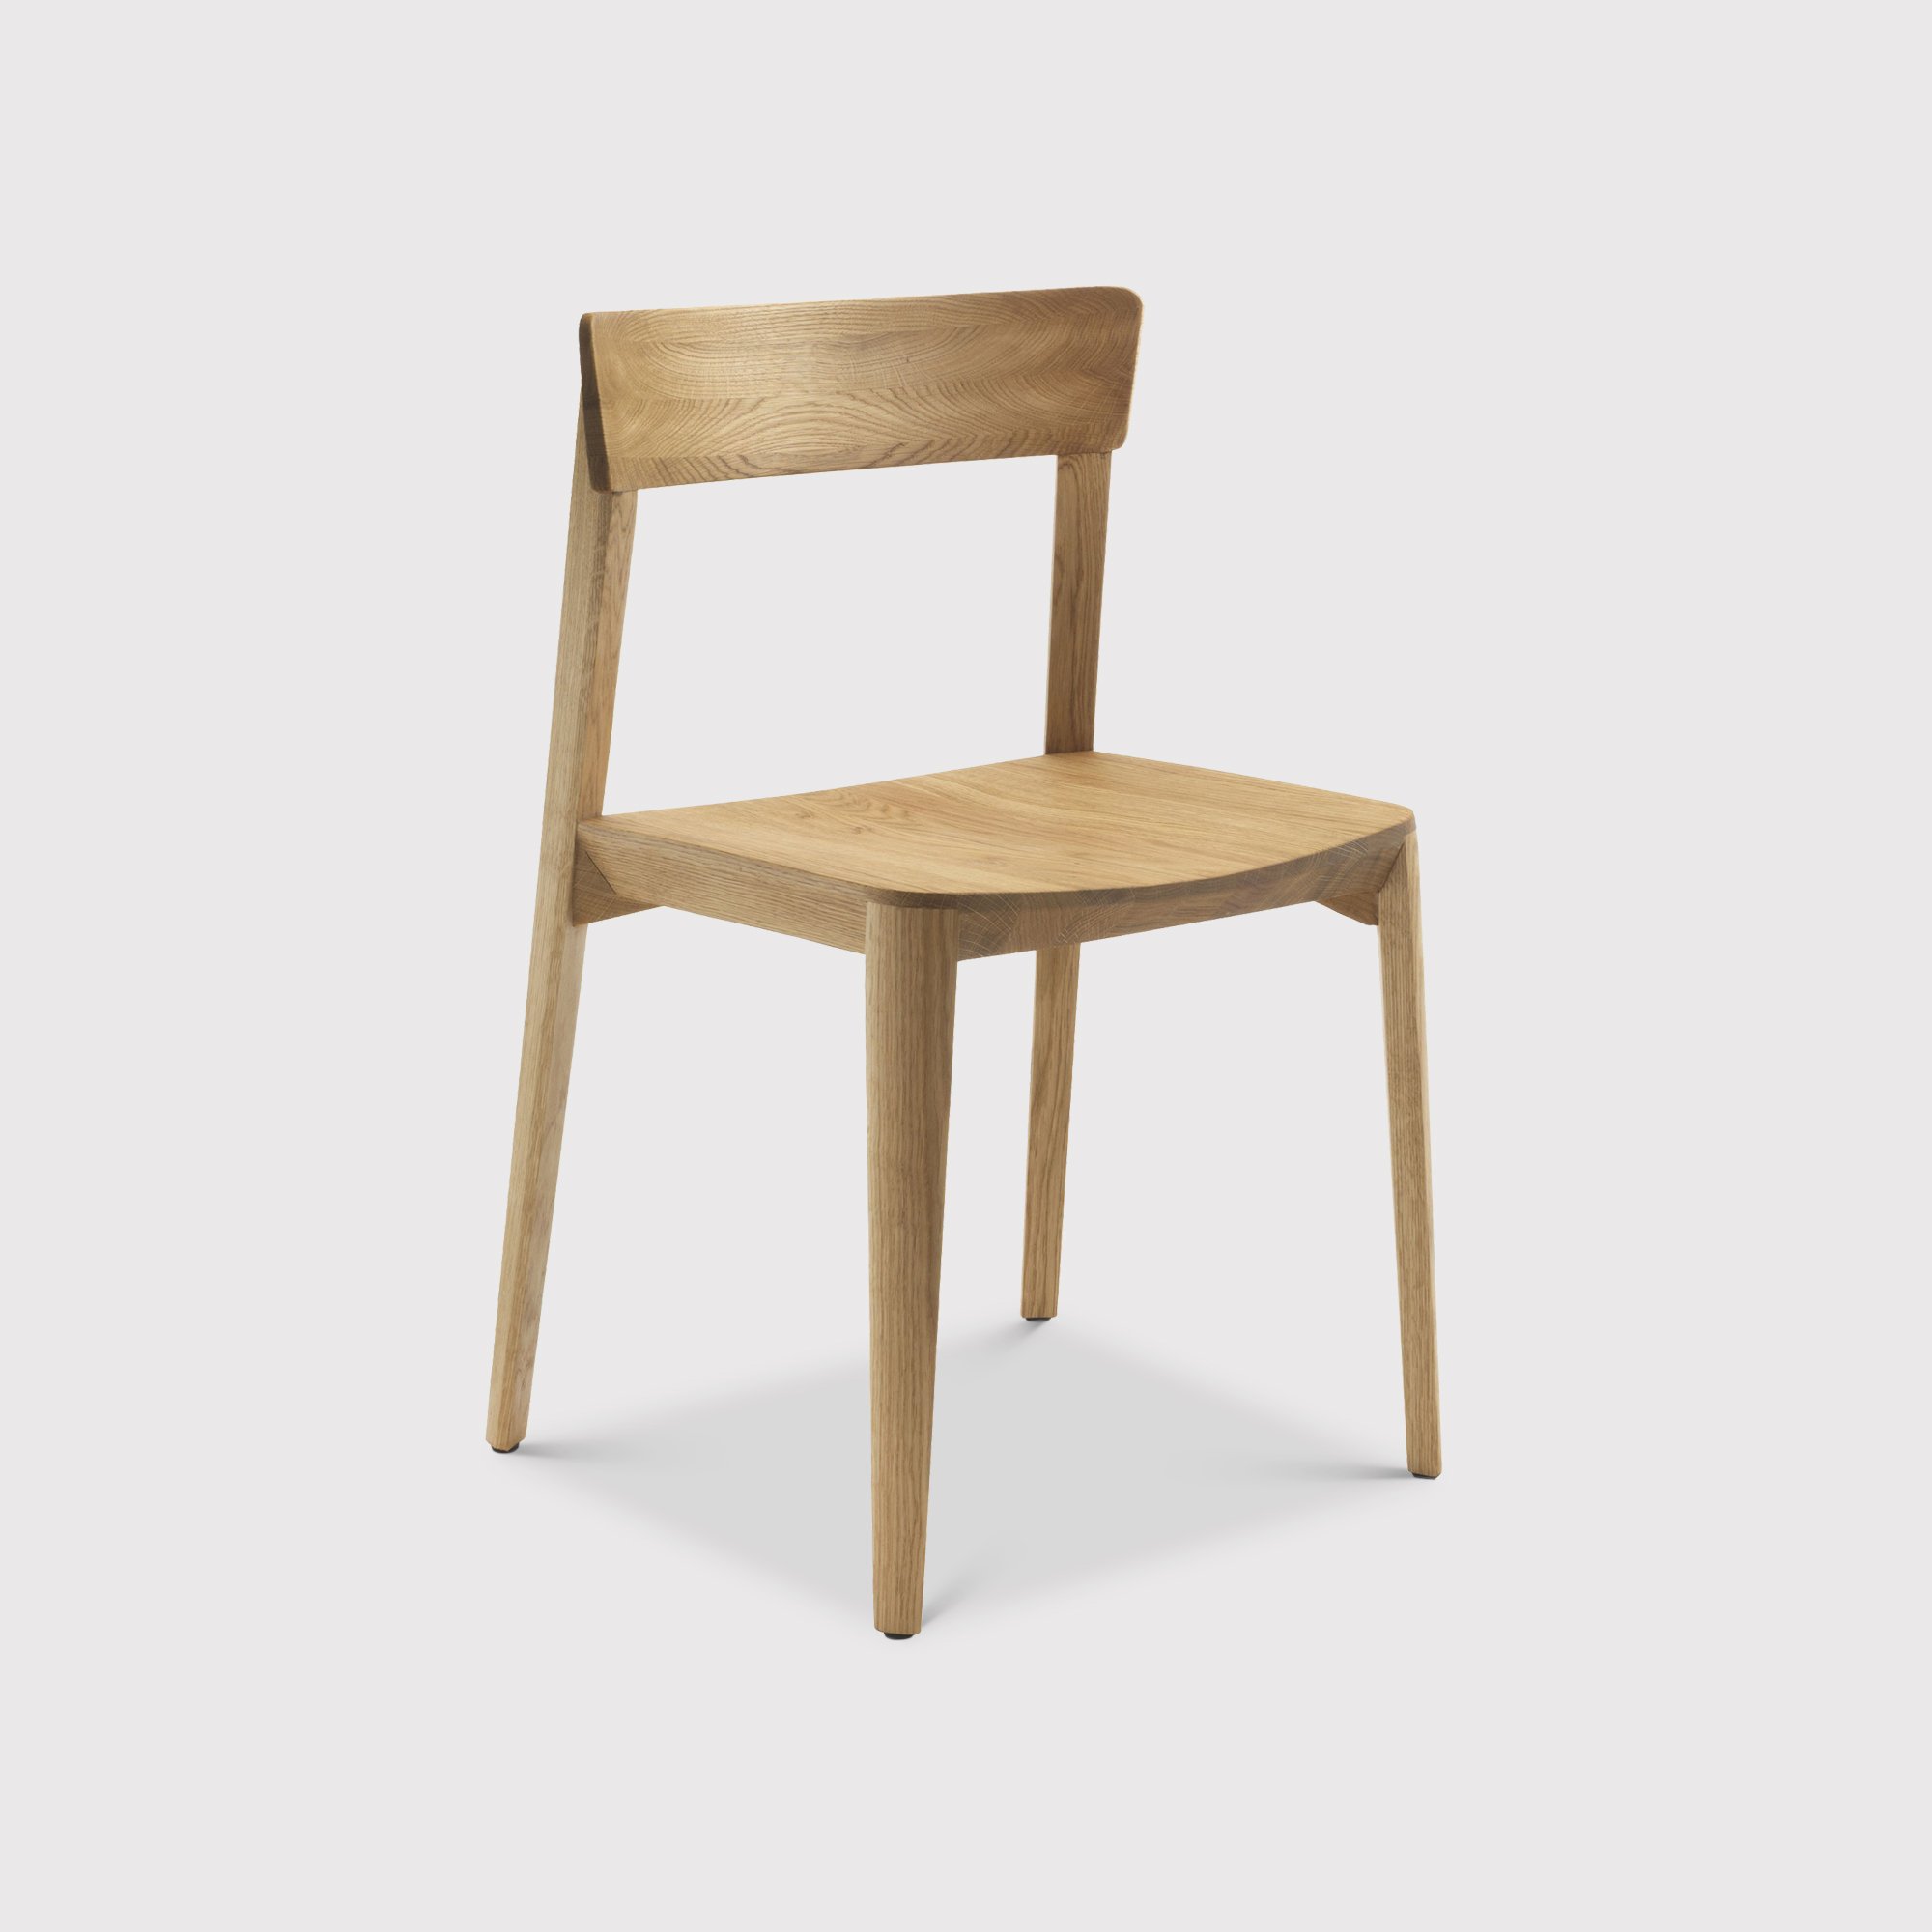 RIVA Mia Wood Dining Chair, Neutral | Barker & Stonehouse